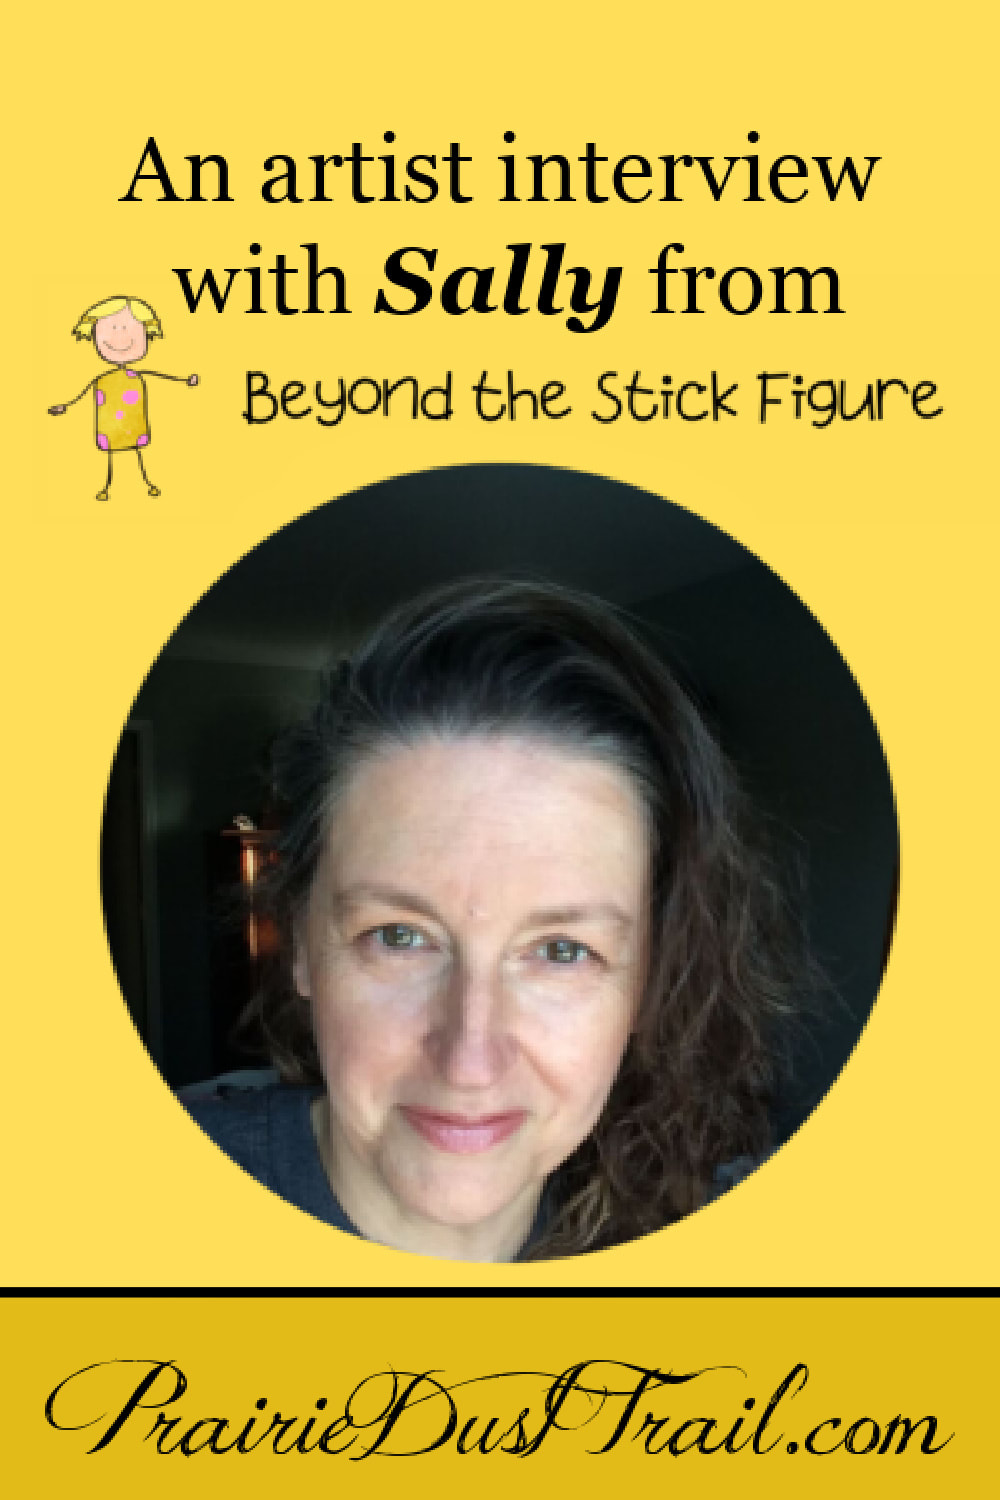 From excellent 2nd-hand finds, felt-tipped pens and black thumb gardening to our love for encouraging the creativity of children, Sally is definitely a kindred spirit. I hope you've enjoyed getting to know more about her. If art is something you'd like to learn more yourself or you need help teaching your children, I HIGHLY encourage you to join the free 14 day trial of the Beyond the Stick Figure course. This course is for ANY age. With all the stress in the world today, the timing of this course is perfect. Art is an ultimate 'self-care' stress relief.